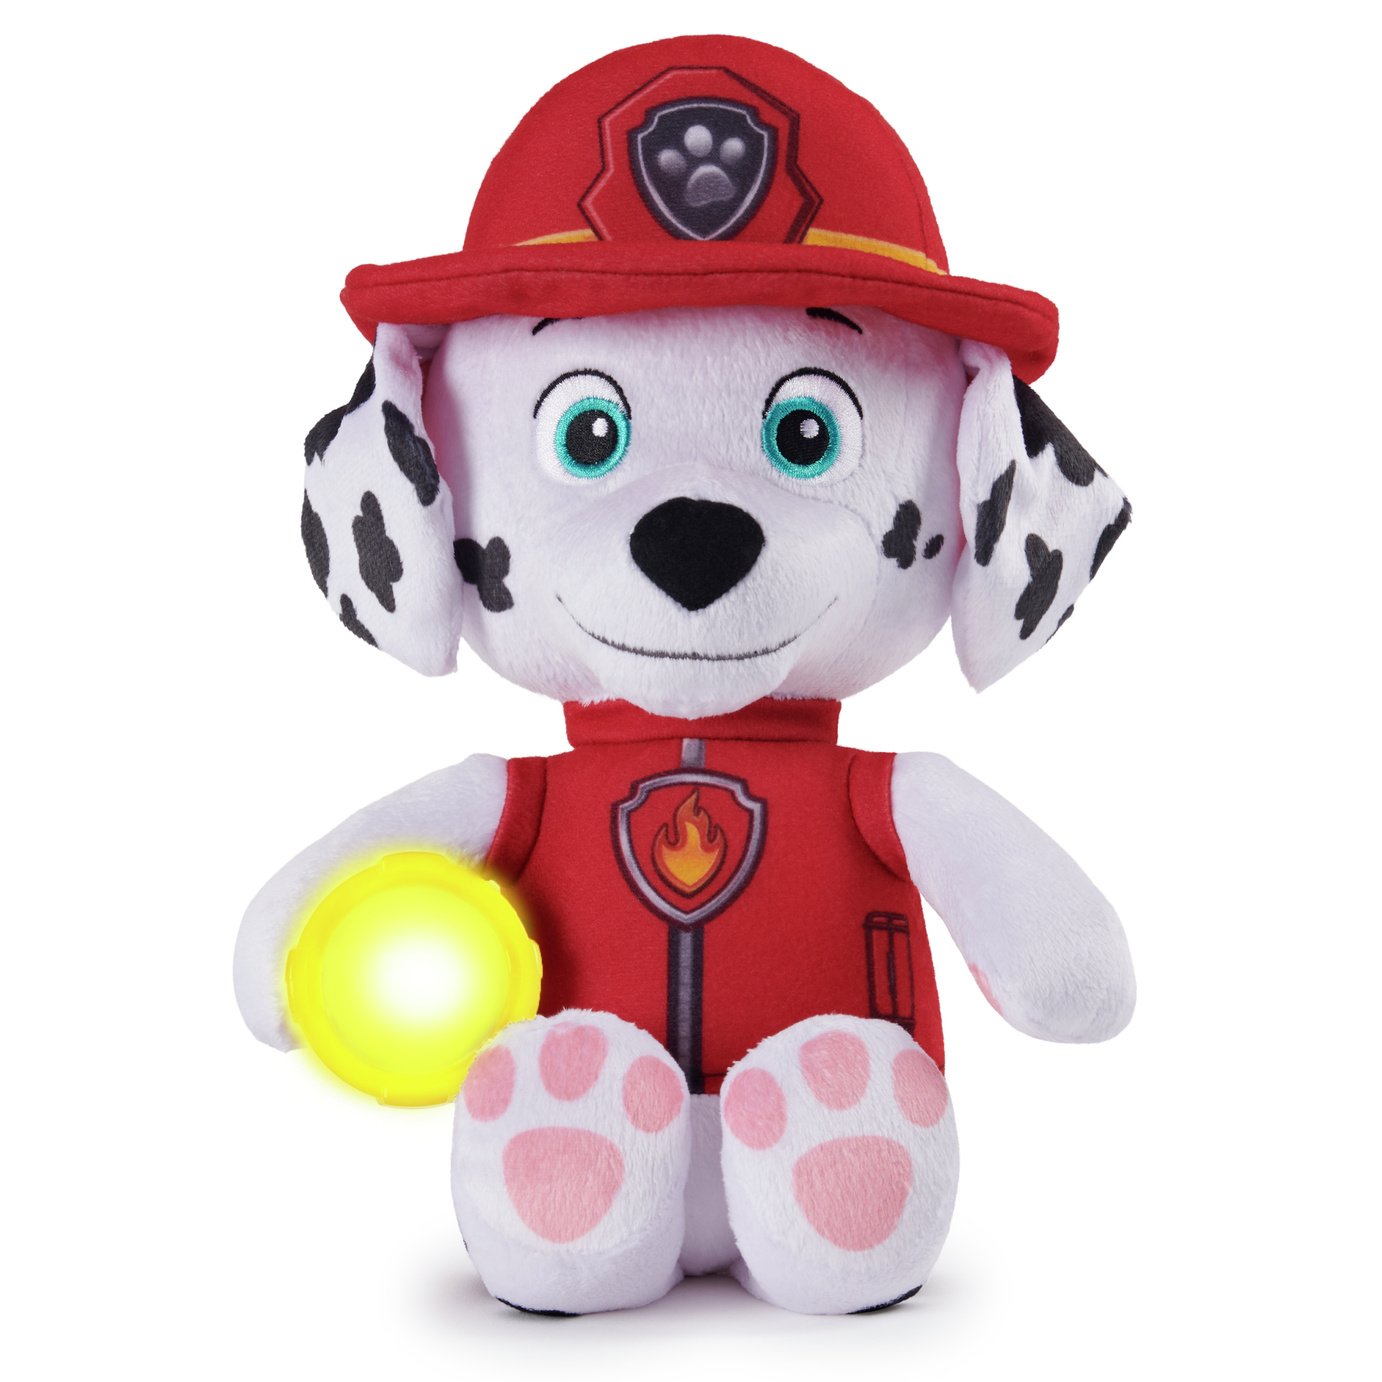 PAW Patrol Snuggle Up Marshall Soft Toy review